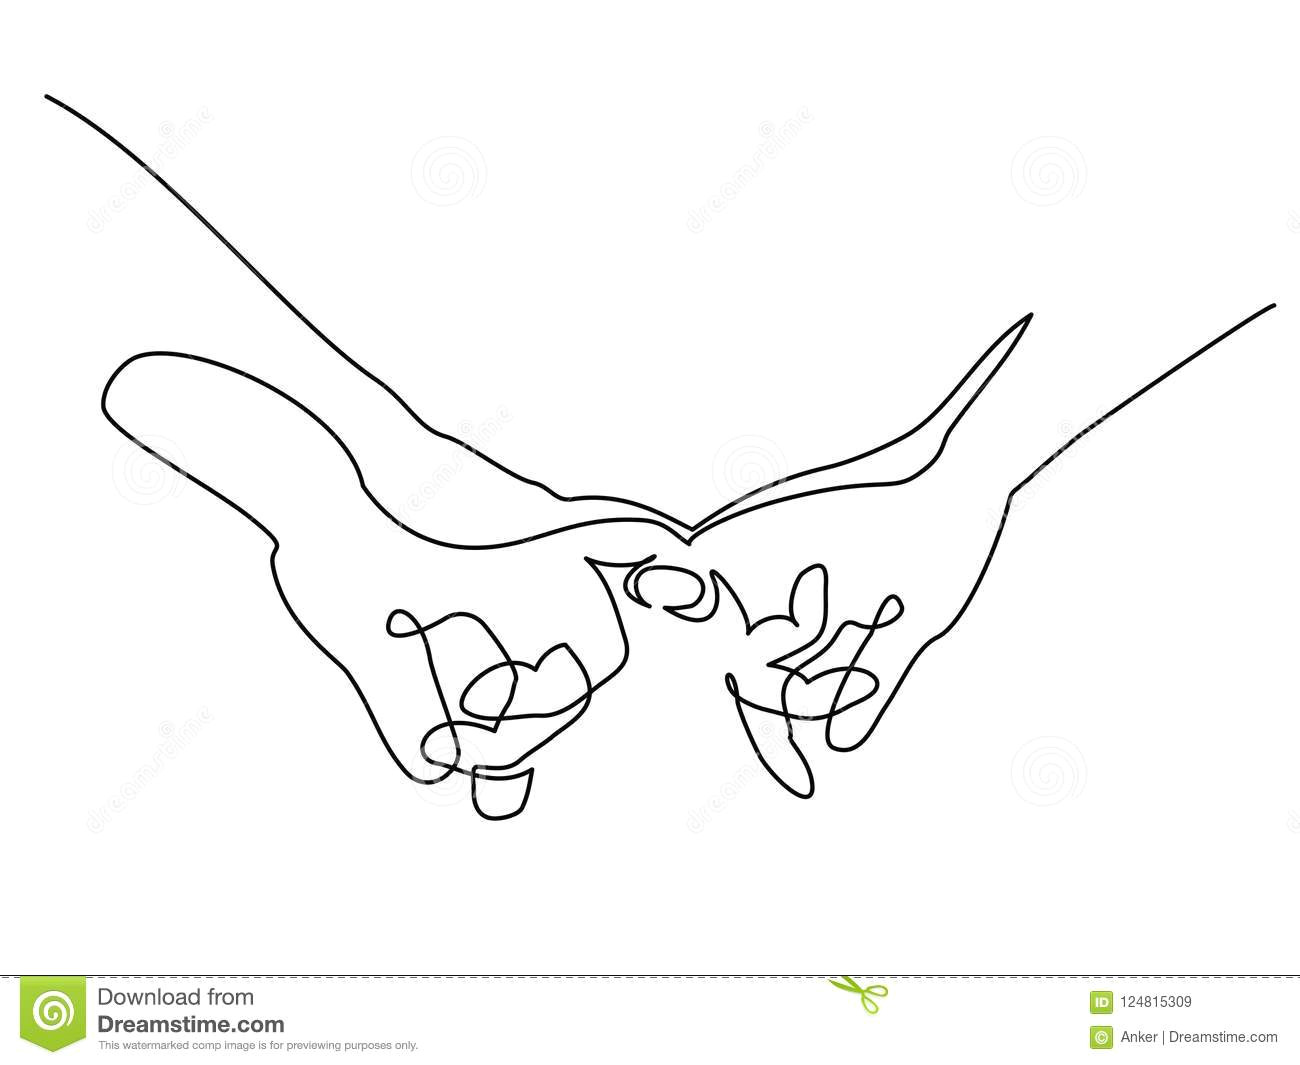 continuous one line drawing hands woman and man holding together with little fingers vector illustration concept for logo card banner poster flyer